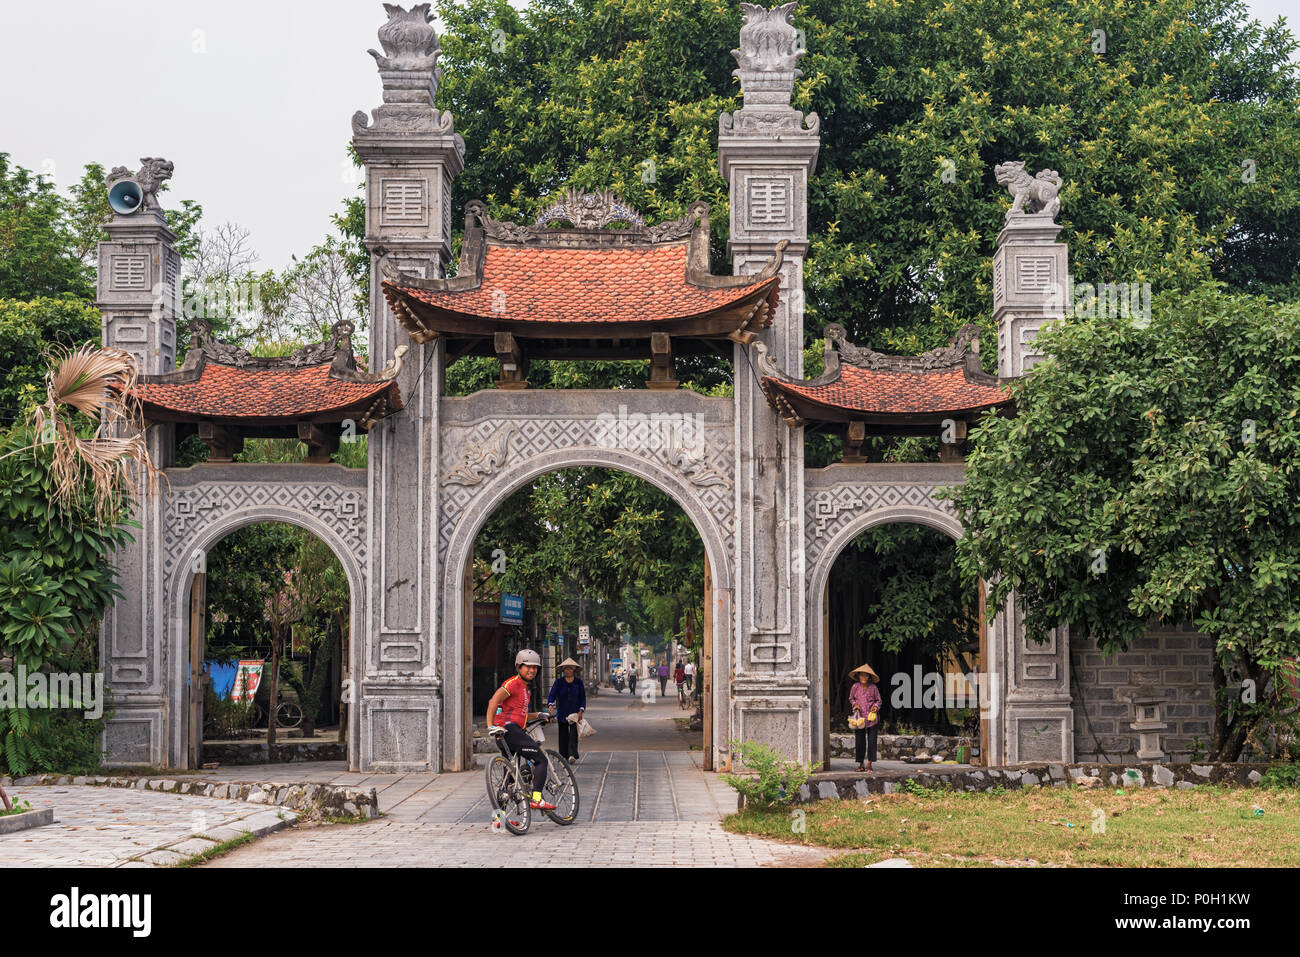 Hoa Lu, Vietnam - October 28, 2017: Man, on a bicycle entering ancient capital of Vietnam Hoa Lu. It was the capital city in the 10th and 11th centuri Stock Photo